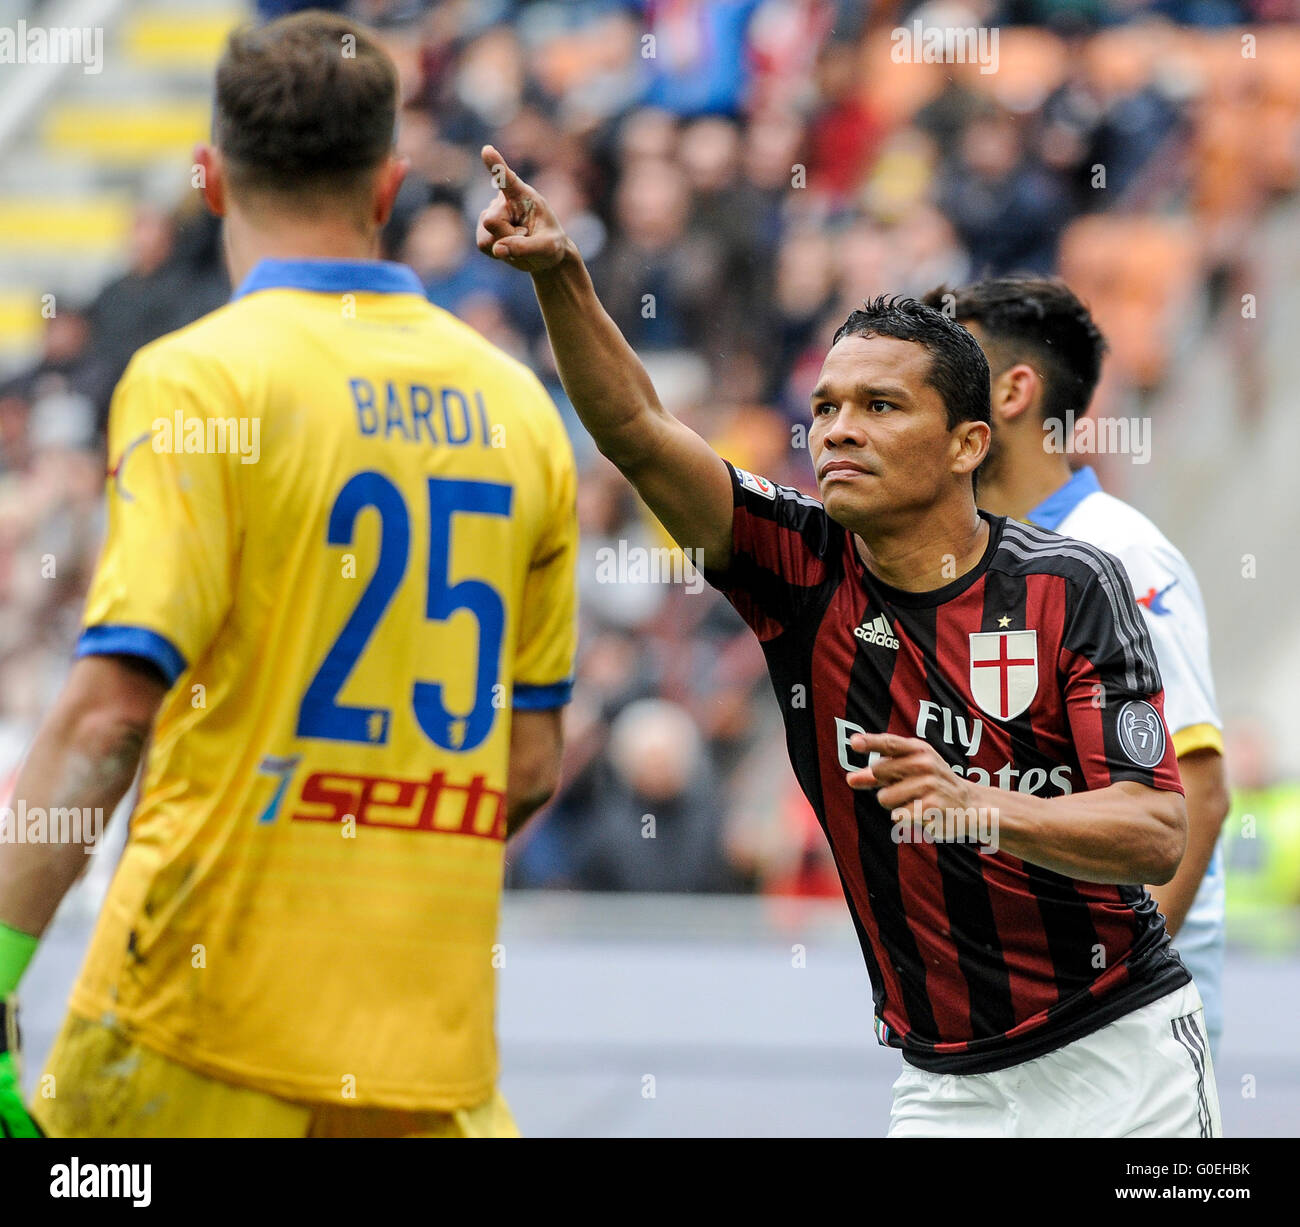 Milan, Italy. 1 may, 2016: Carlos Bacca celebrates after scoring during the Serie A football match between AC Milan and Frosinone Calcio Credit:  Nicolò Campo/Alamy Live News Stock Photo